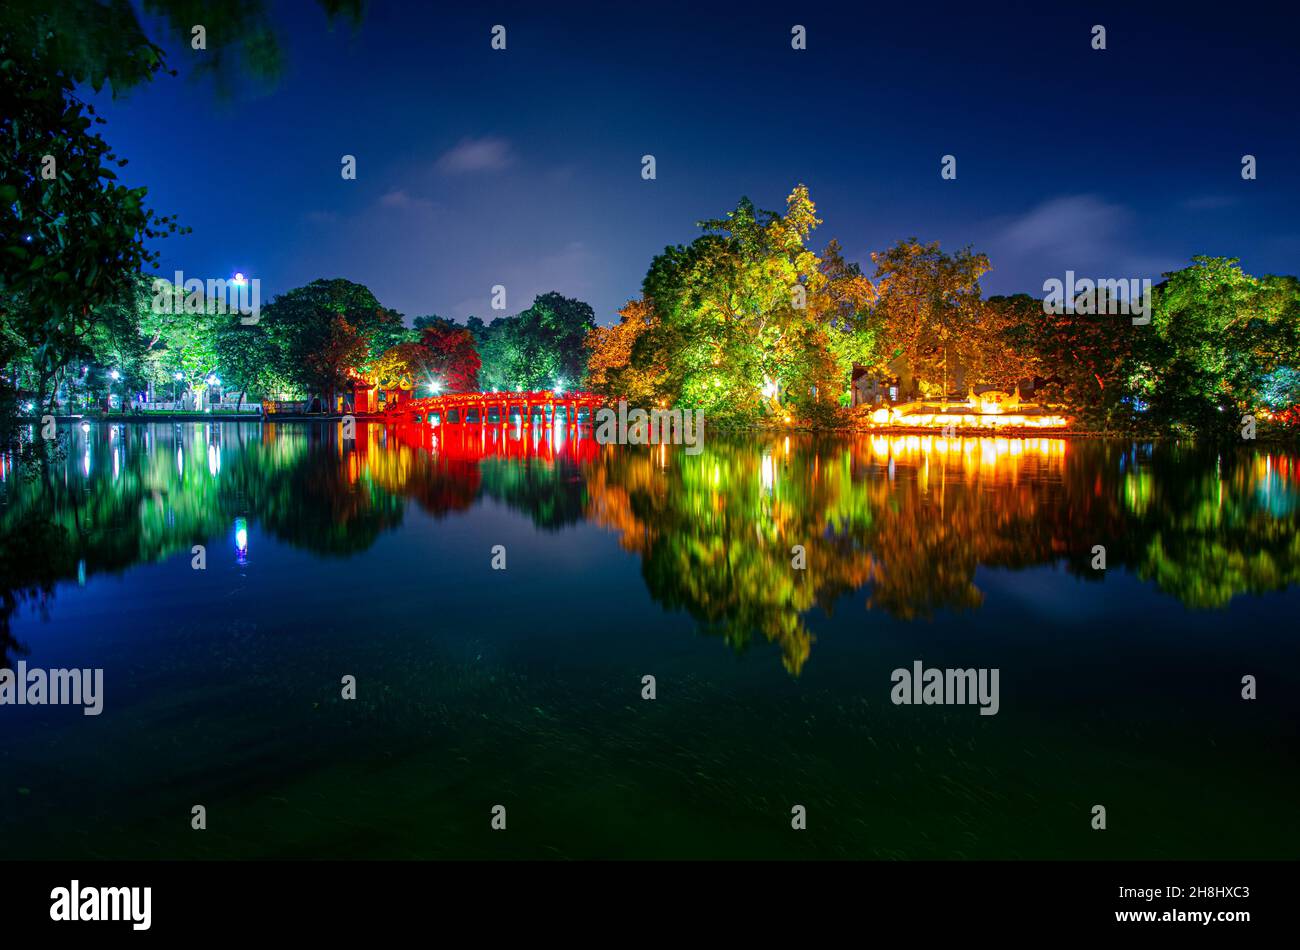 Ngoc Son Temple in Hanoi, Vietnam, at night, all lit up with reflections on the lake Stock Photo